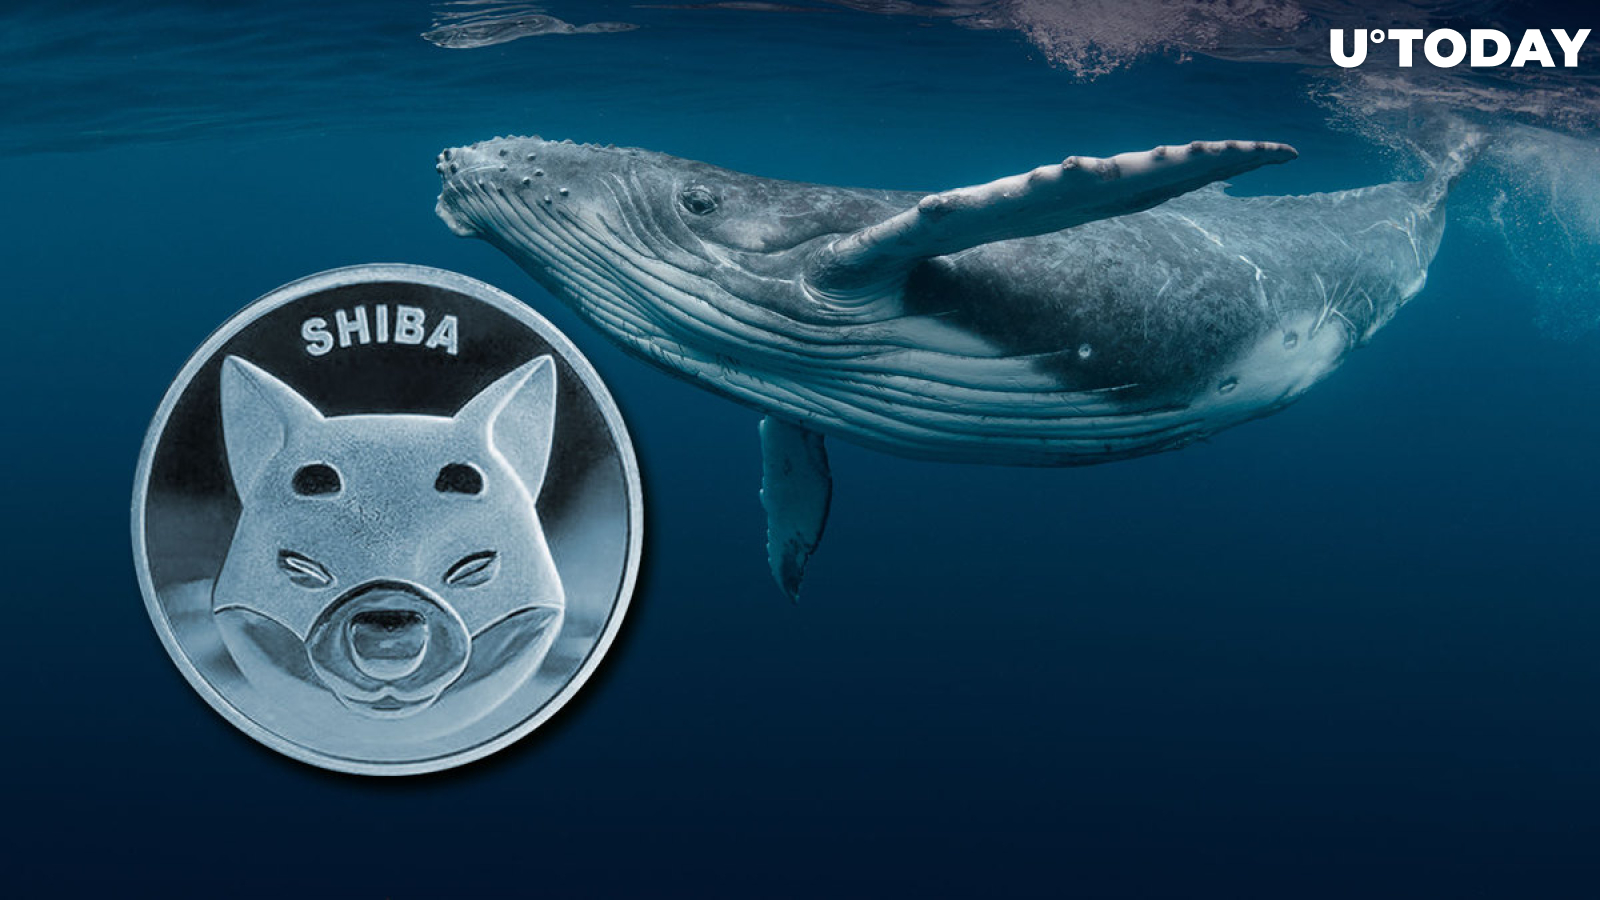 SHIB Trading Volume Up 102% As Whales Grab 323 Billion Coins in 24 Hours 